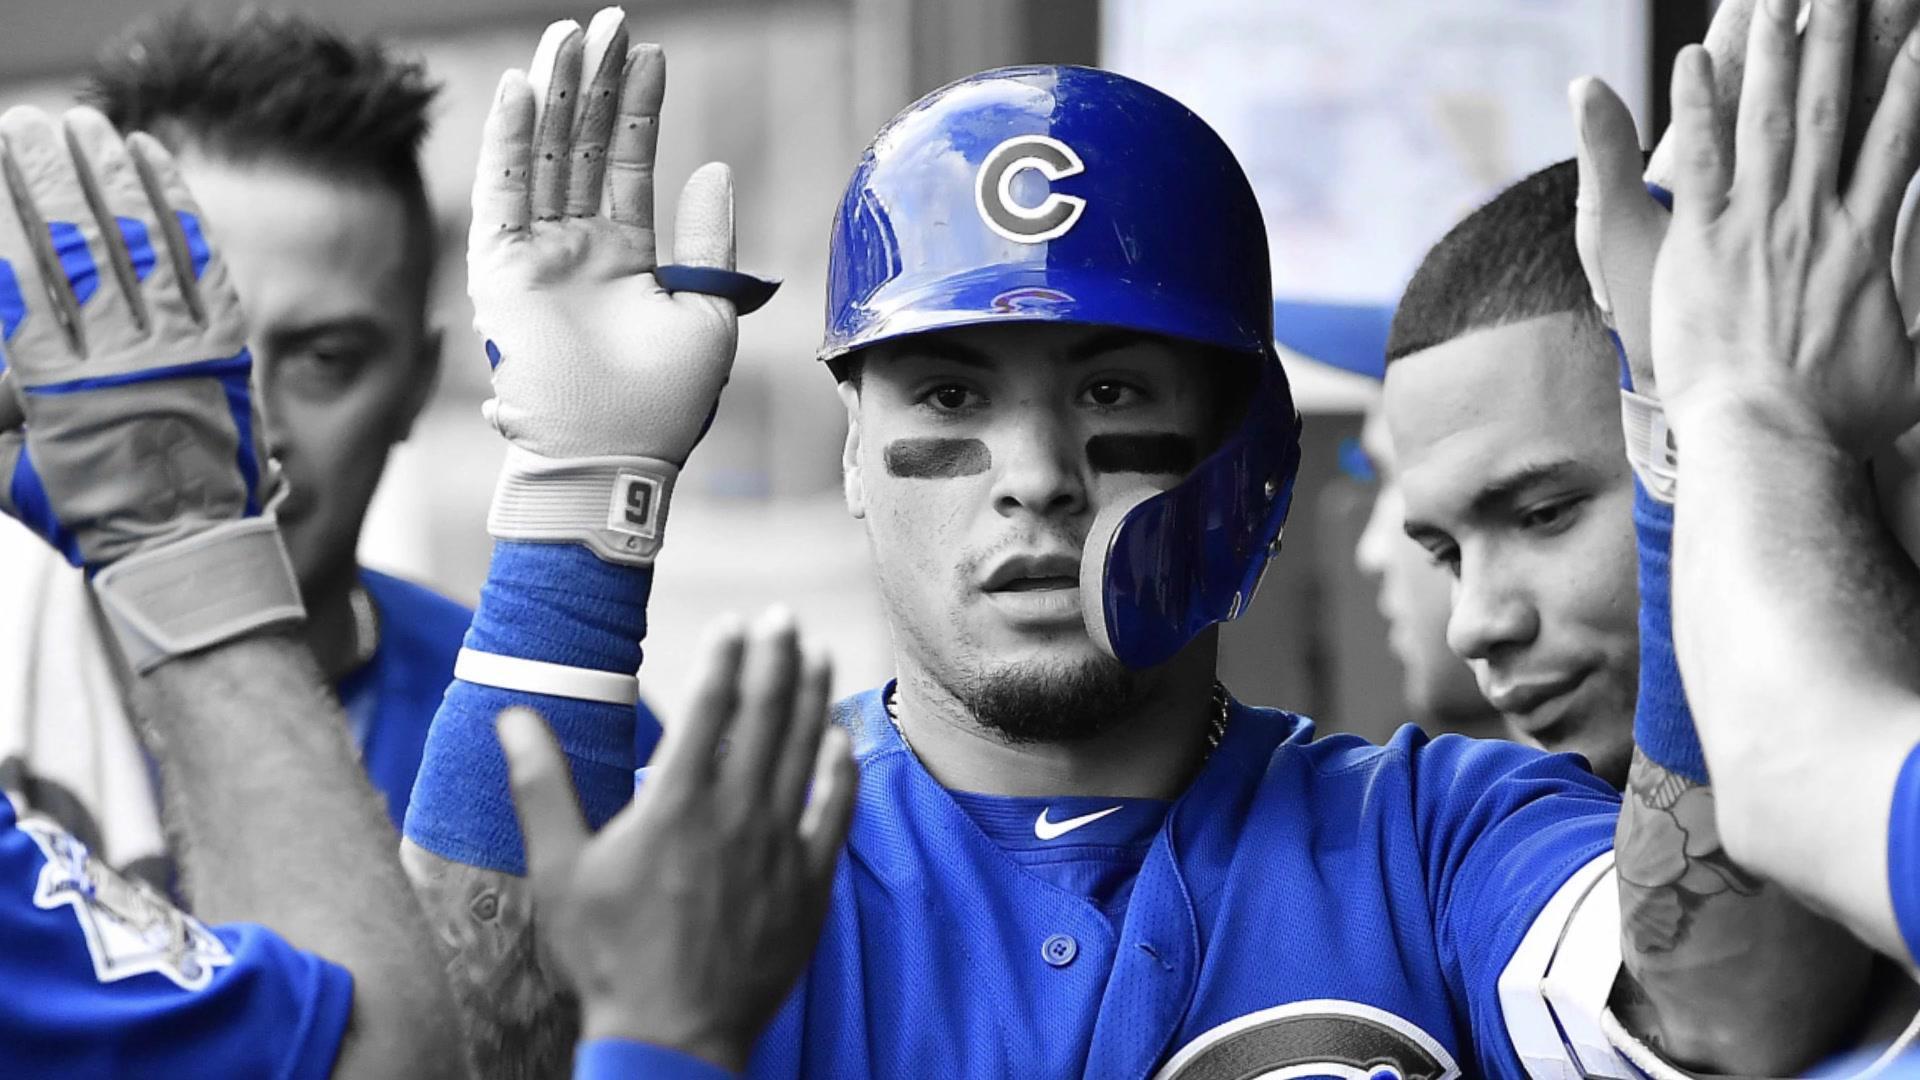 Javier Báez keeps showing off his skills with another spectacular